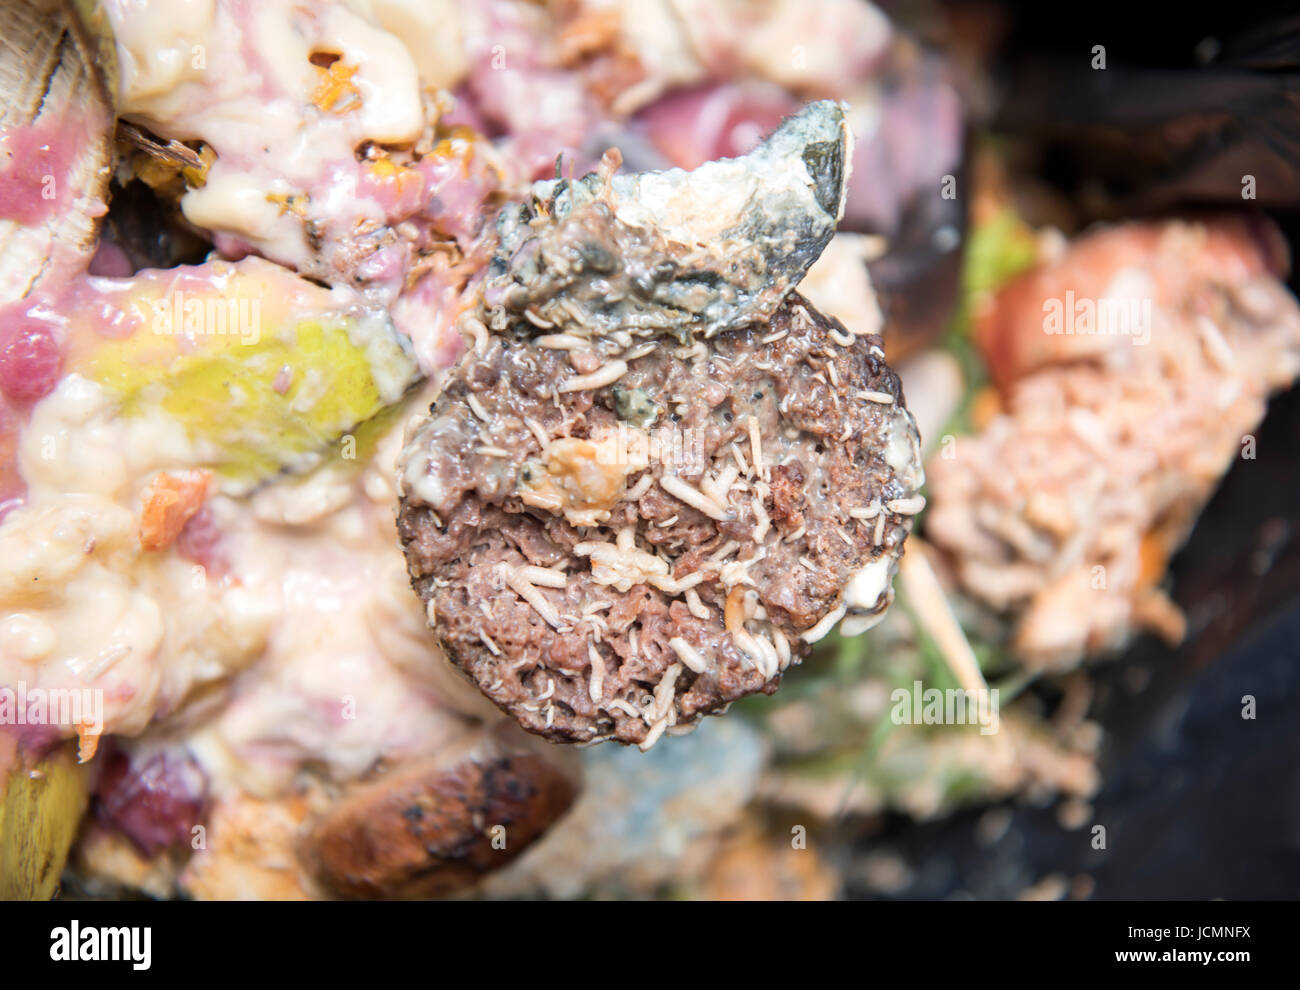 A domestic food waste container which has become infested with maggots UK Stock Photo